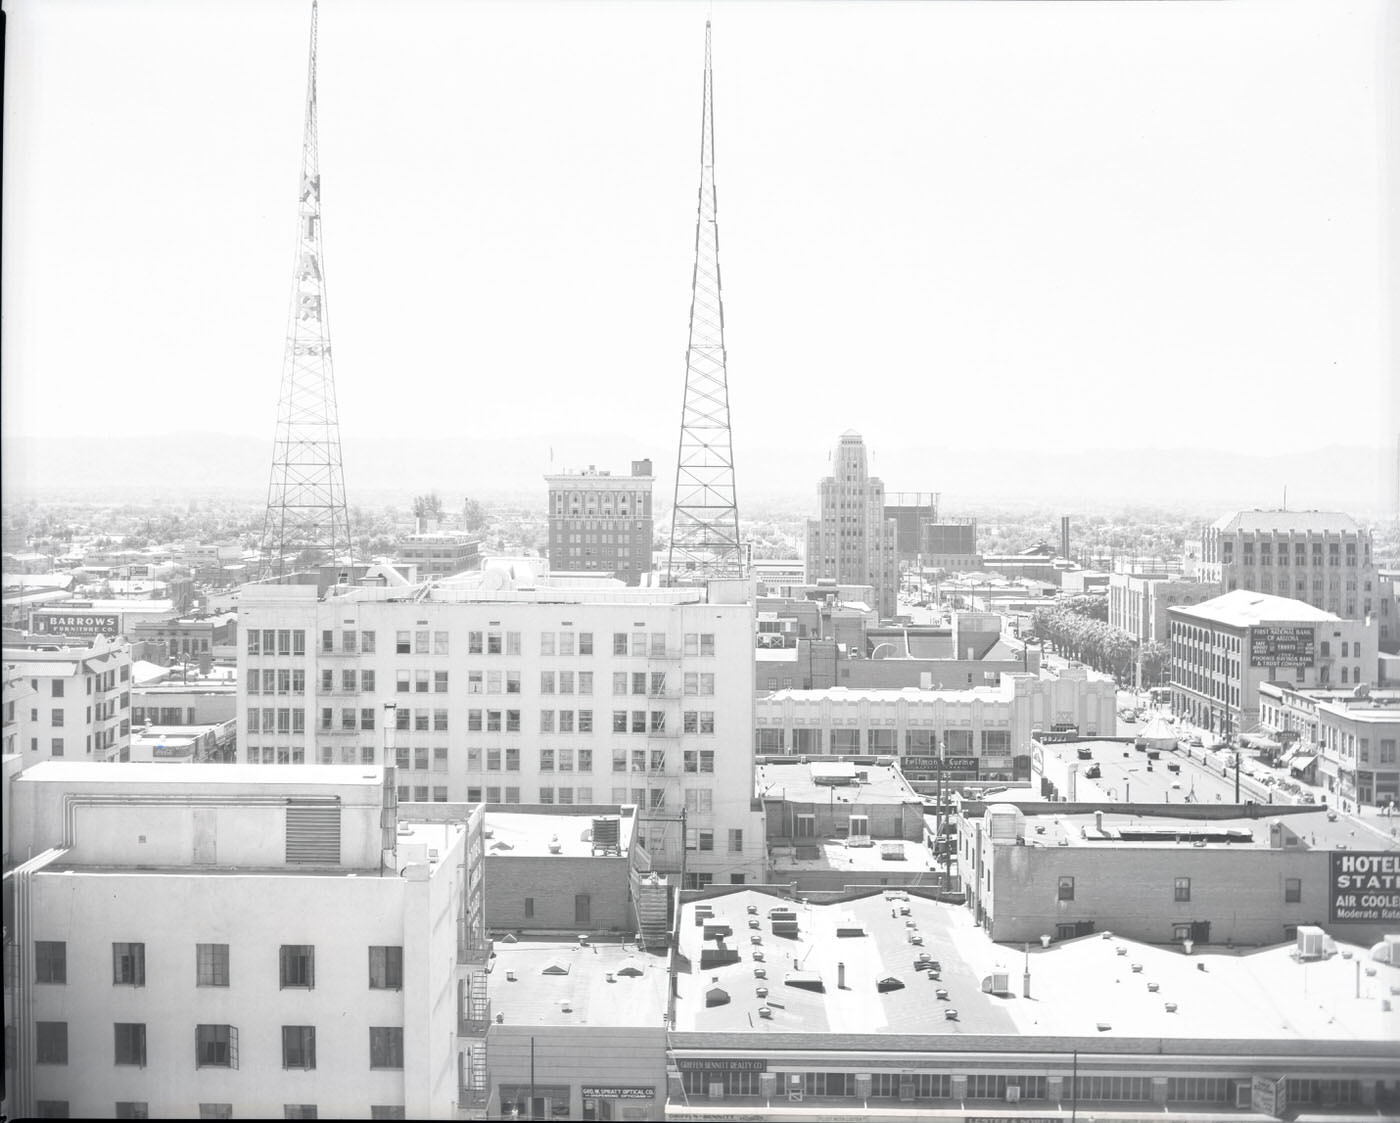 Cityscape of Phoenix, 1946. View looking south from a rooftop at approximately Central and Van Buren. KTAR's towers on the Heard Building are visible in the foreground.